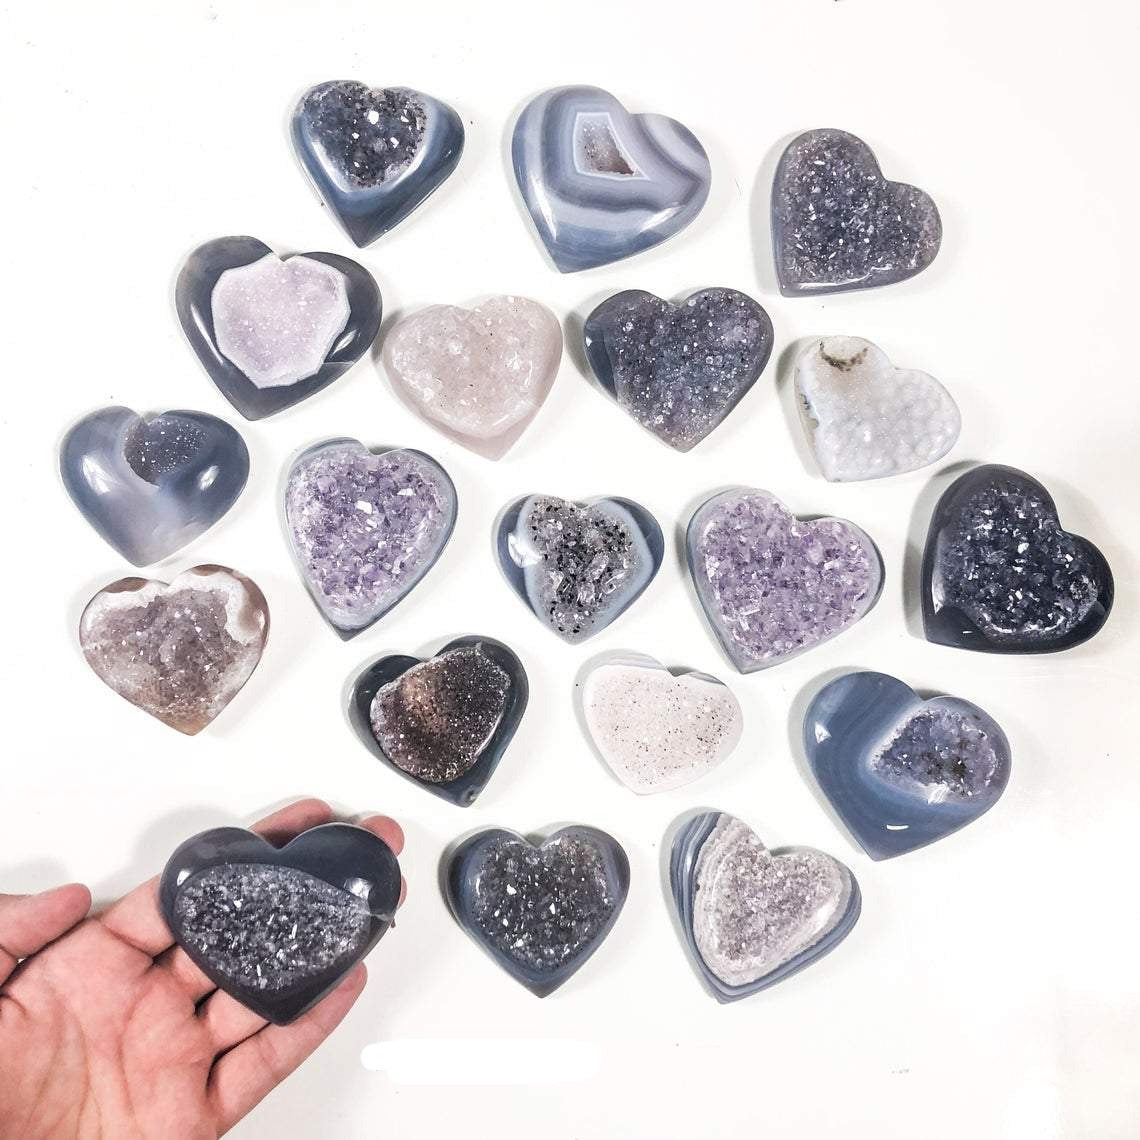 One agate druzy heart in a hand. Multiple agate druzy hearts on a white background displaying color and pattern variation.